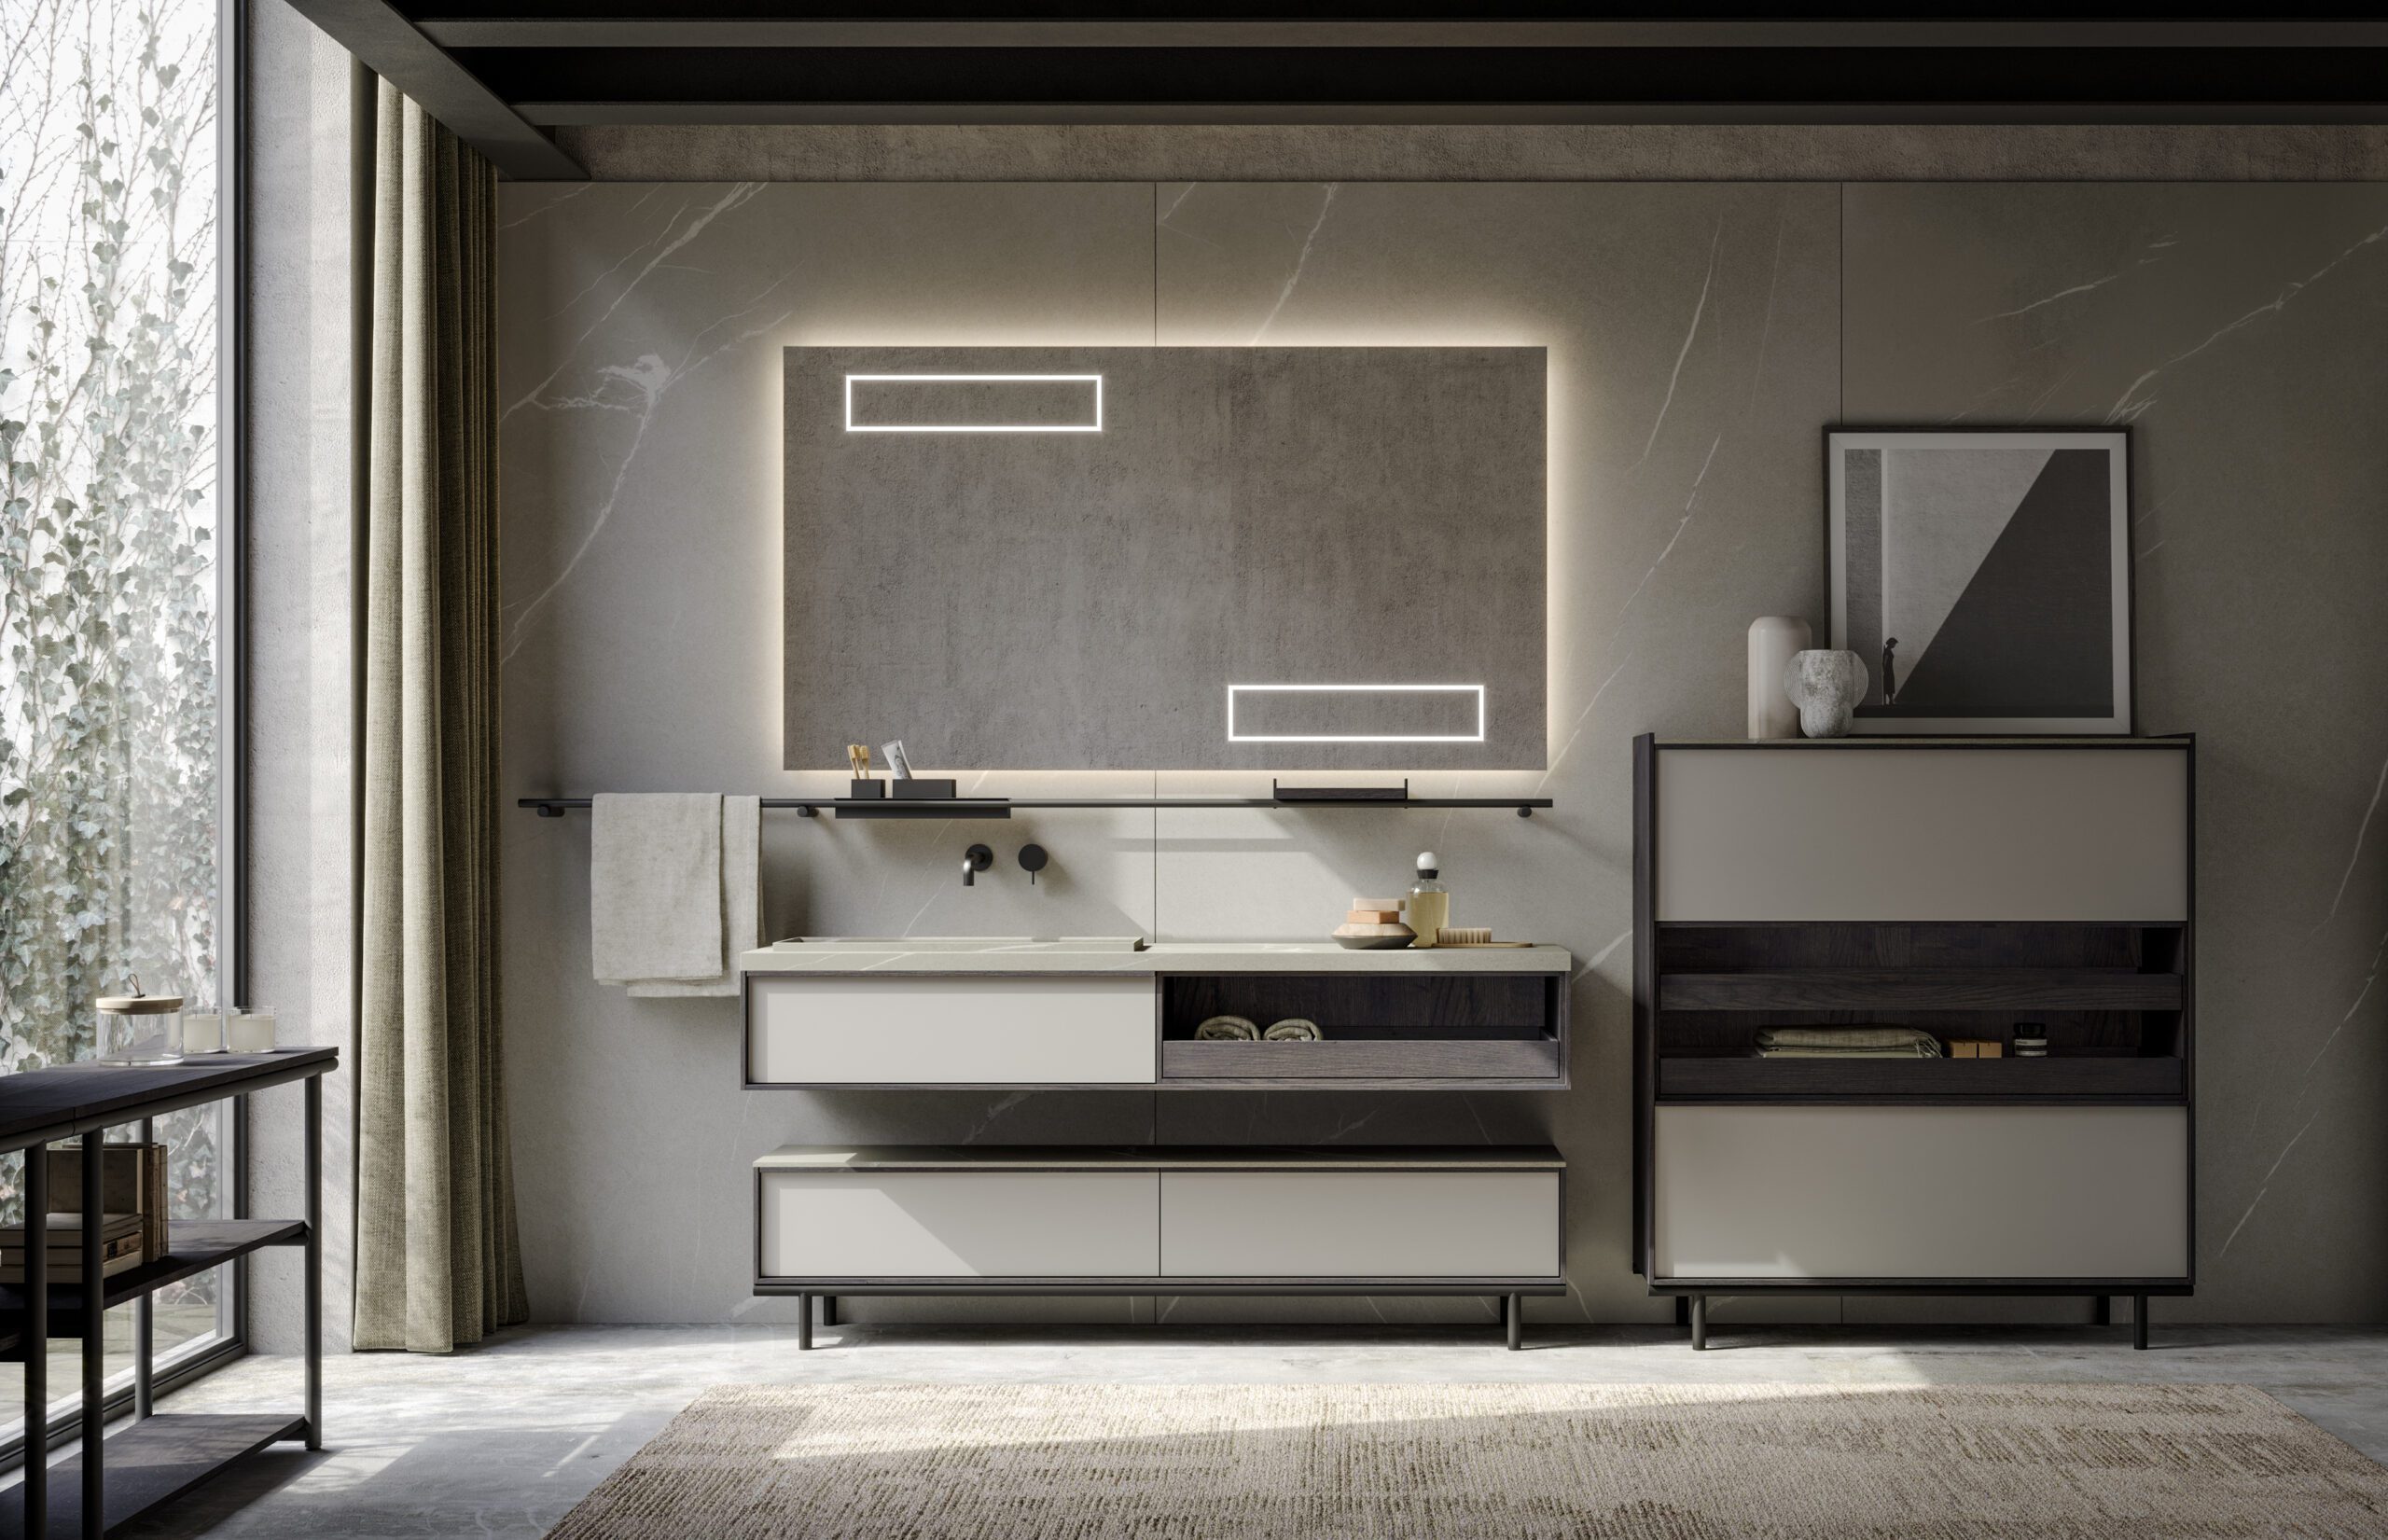 Sartus luxury bathroom design with modular cabinets in Grigio Seta matte lacquer with frames, drawers, and shelves in Rovere Fumo wood. Accessorized metal bar for the wall.